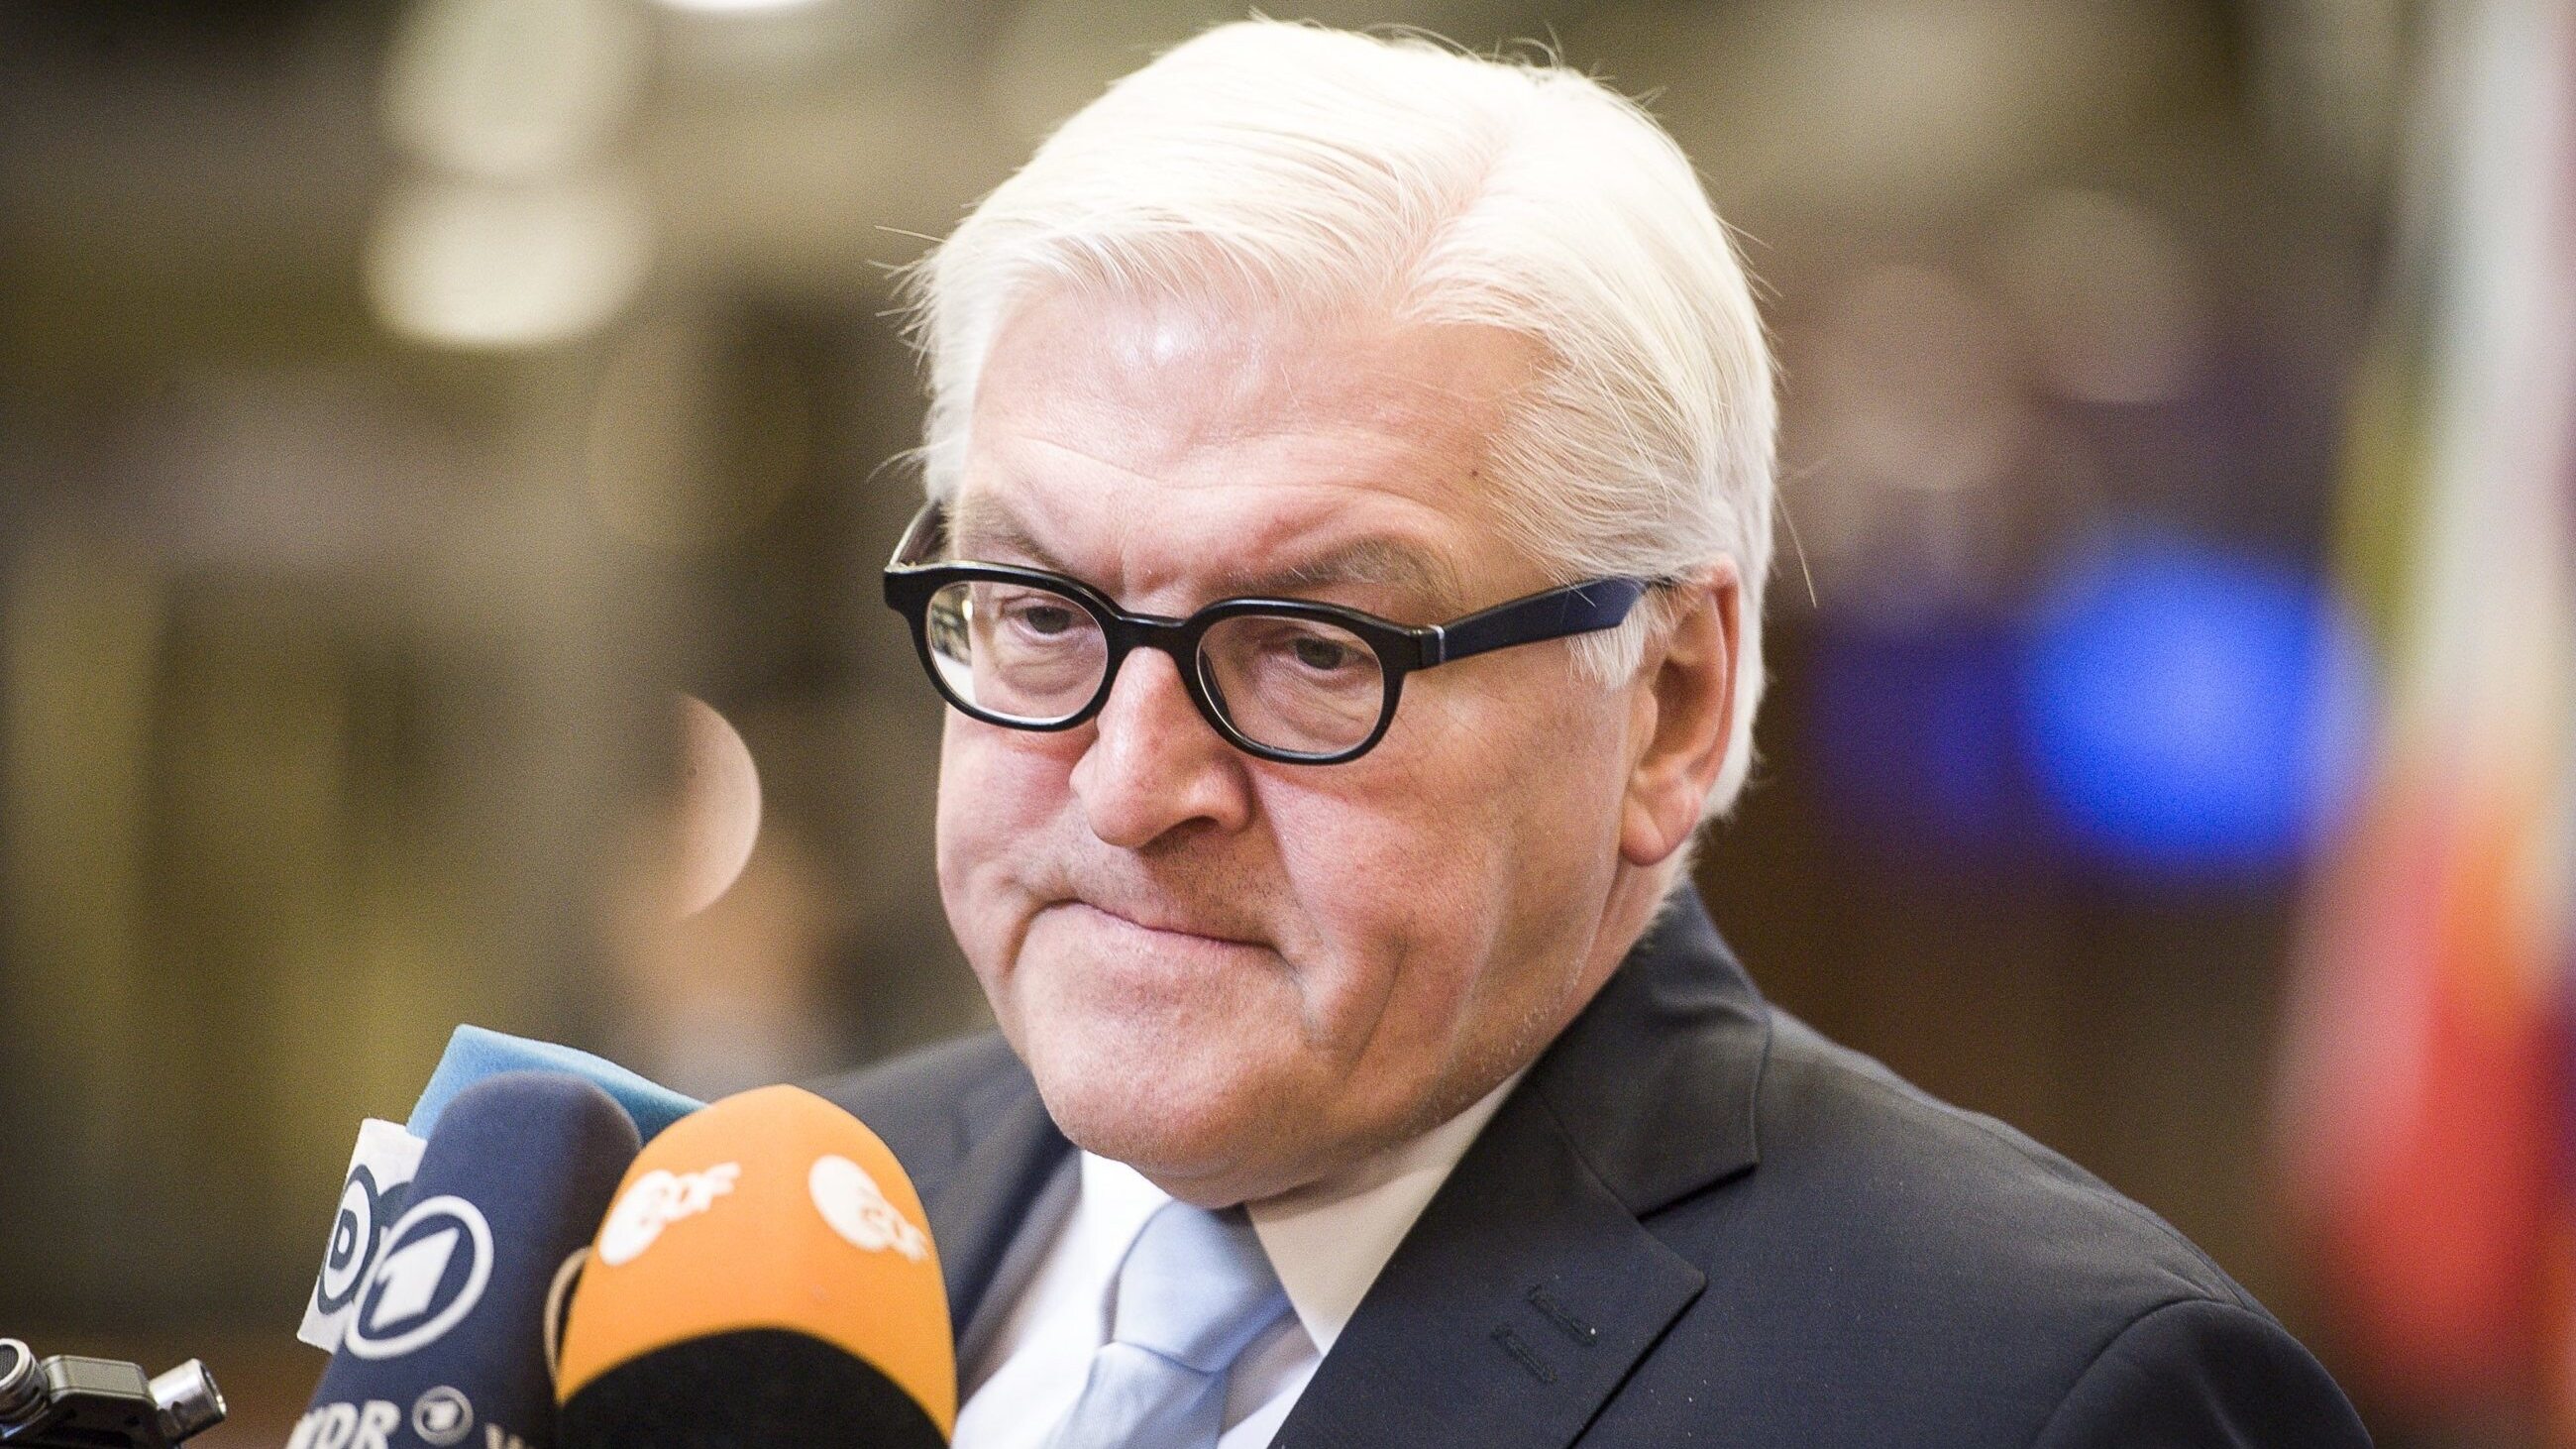 The German president rejected Poland’s claim for reparations.  Remove Steinmeier position